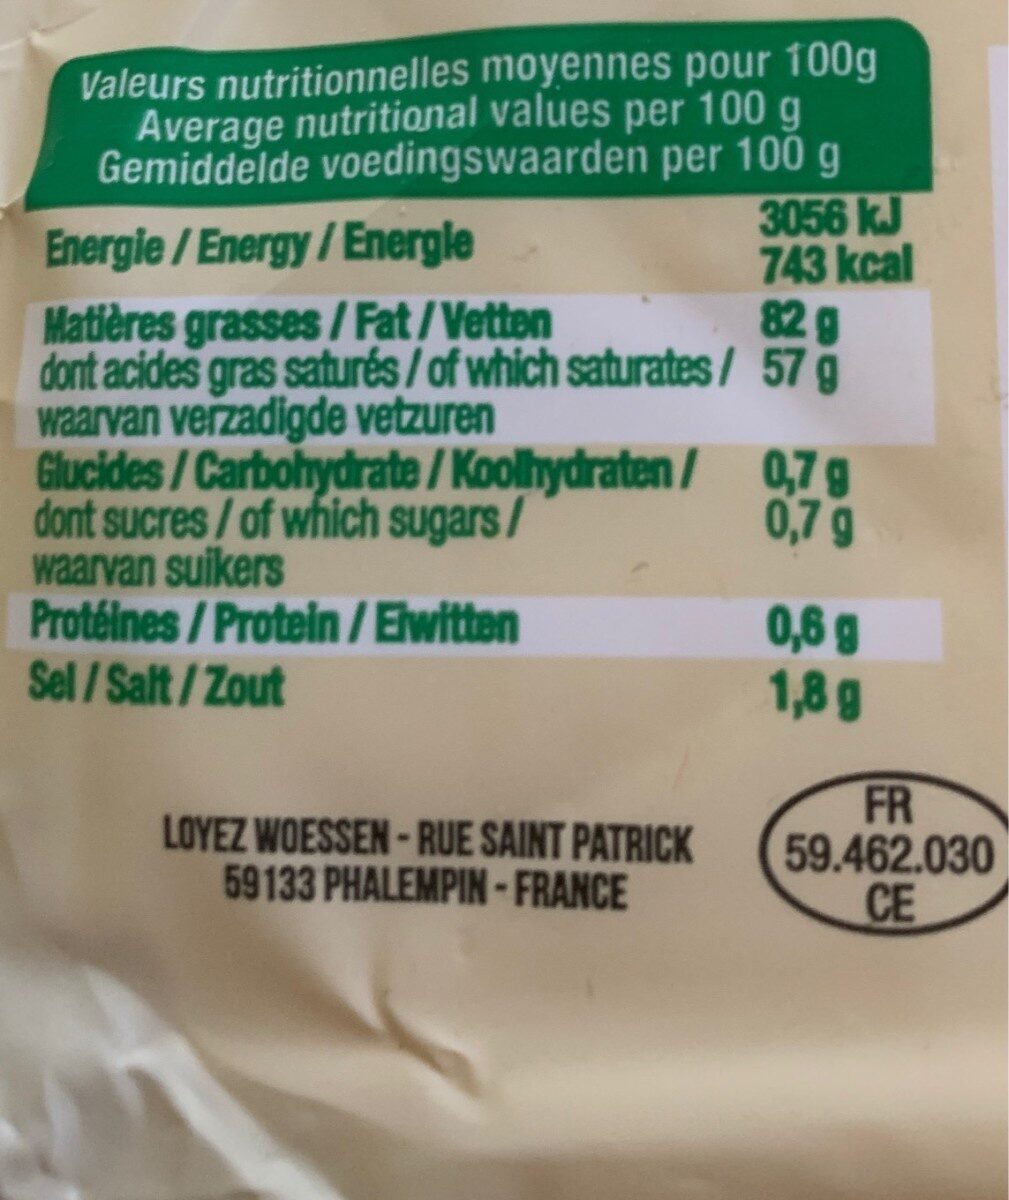 Beurre - Nutrition facts - fr